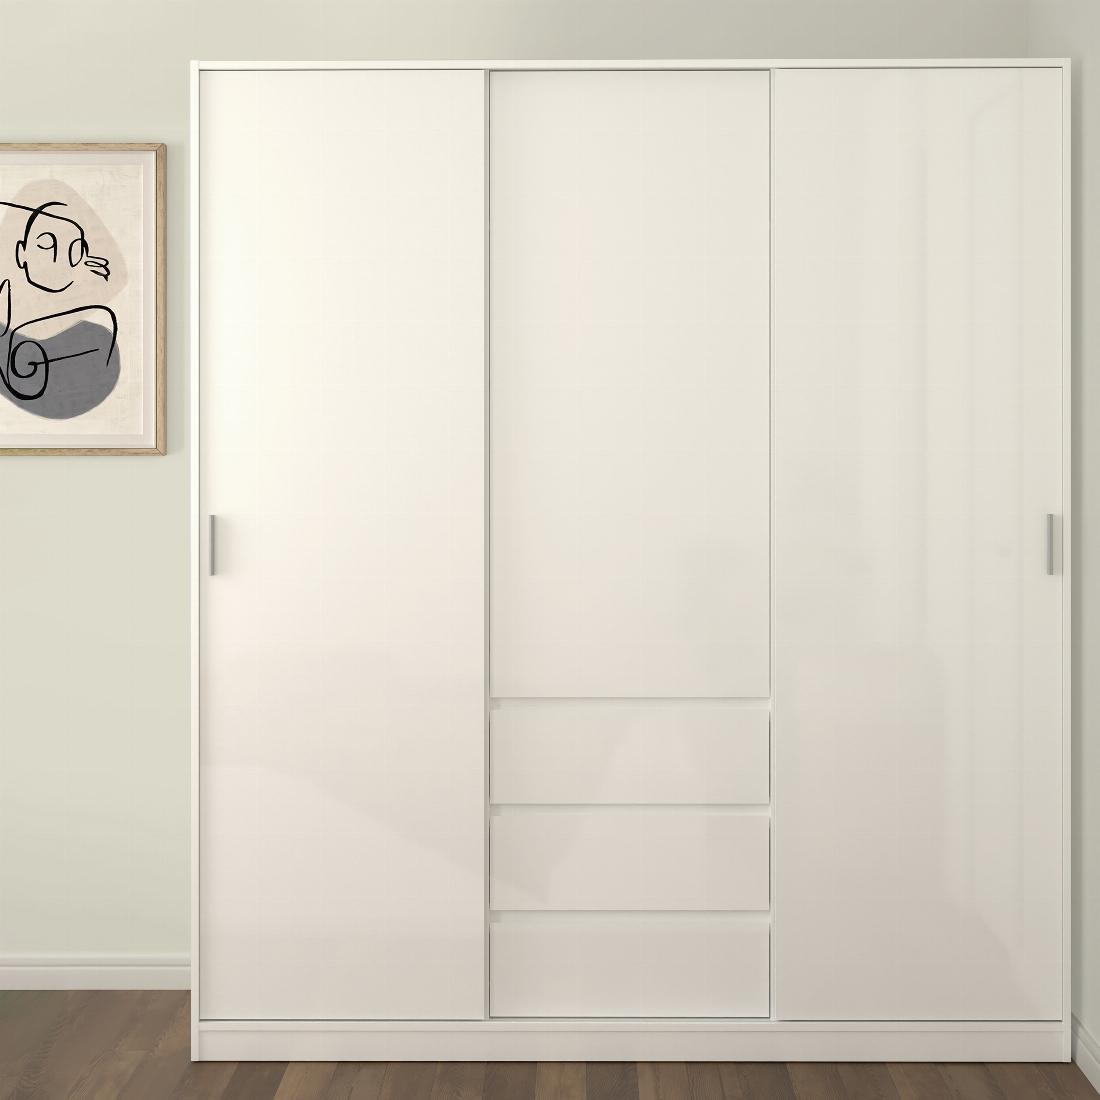 Naia Wardrobe with 2 sliding doors + 1 door + 3 drawers in White High Gloss